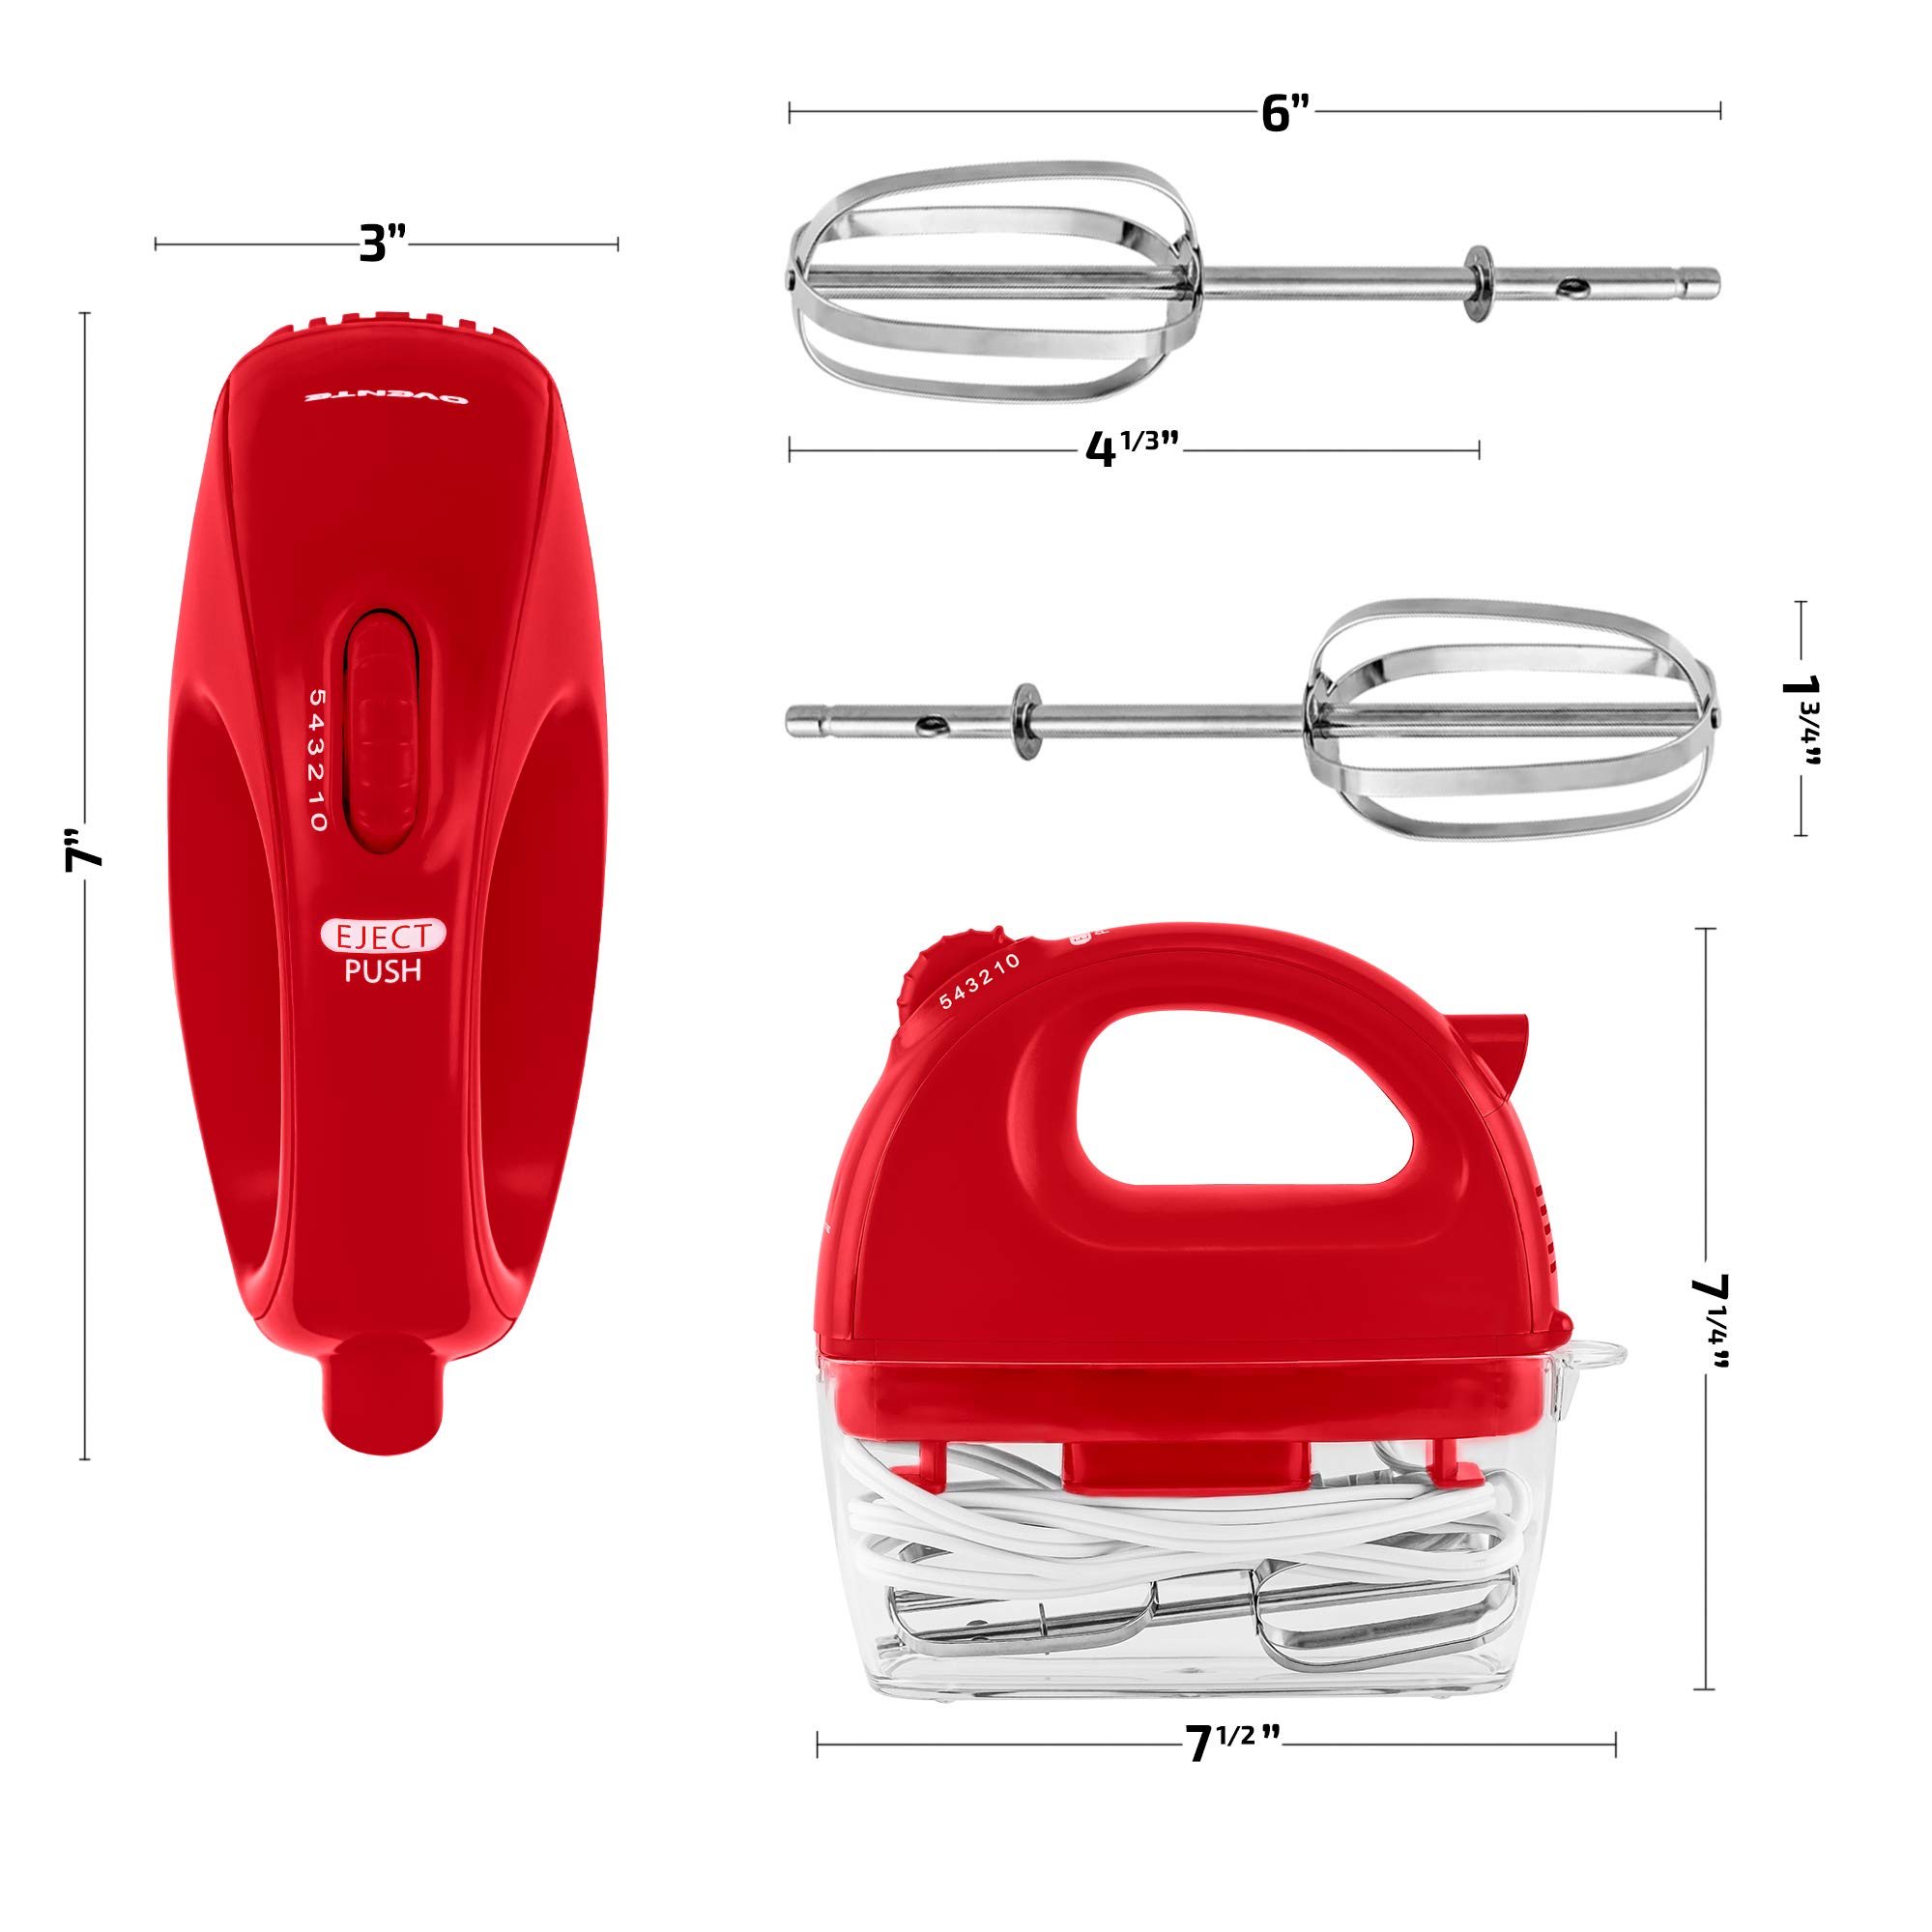 OVENTE Portable Electric Hand Mixer 5 Speed Mixing, 150W Powerful Blender for Baking & Cooking with 2 Stainless Steel Chrome Beater Attachments & Snap Clear Case Compact Easy Storage, Red HM161R